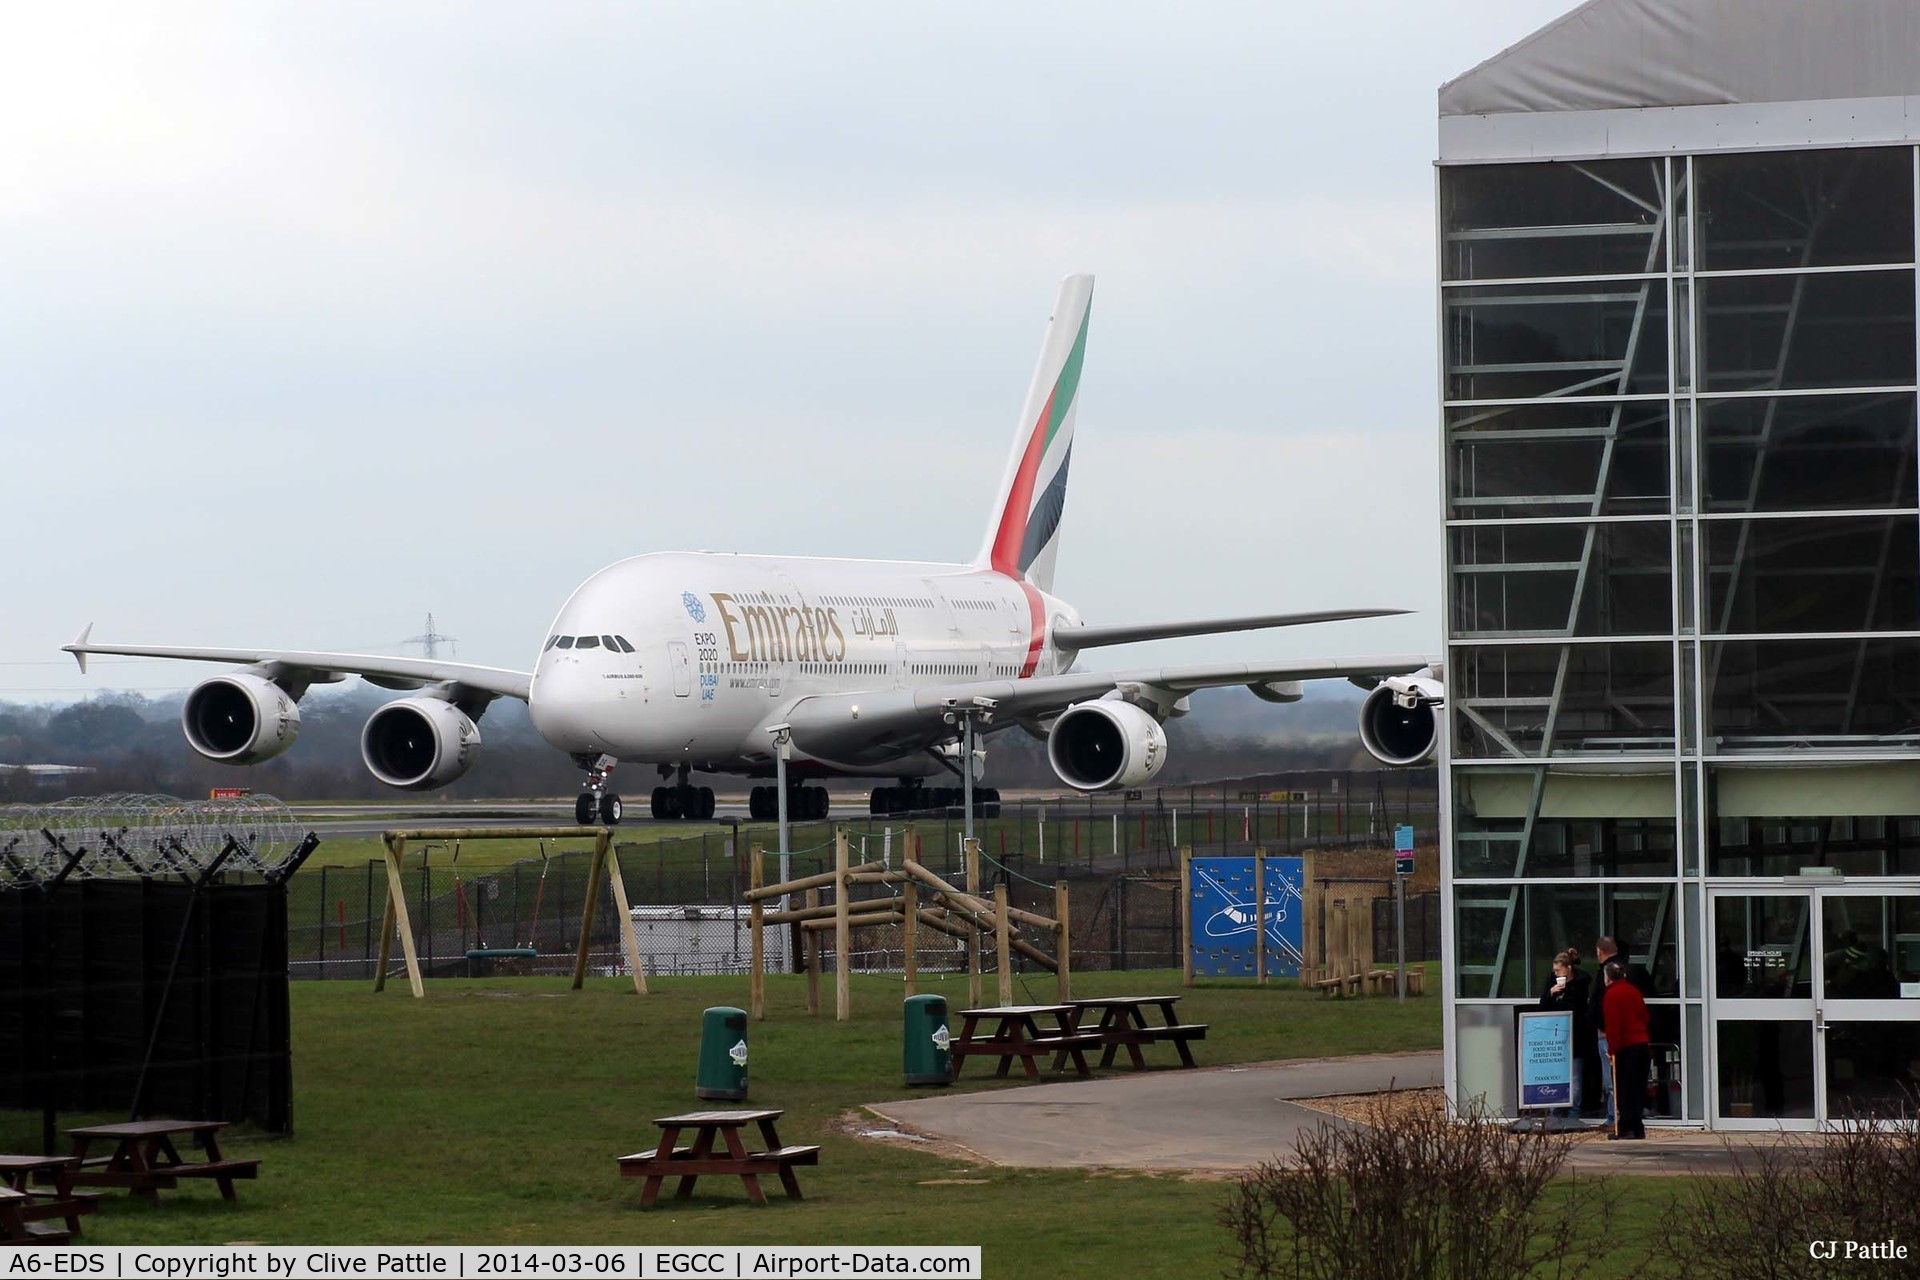 A6-EDS, 2011 Airbus A380-861 C/N 086, Manchester arrival - taxy to the gate past the Restaurant and Concorde Hangar